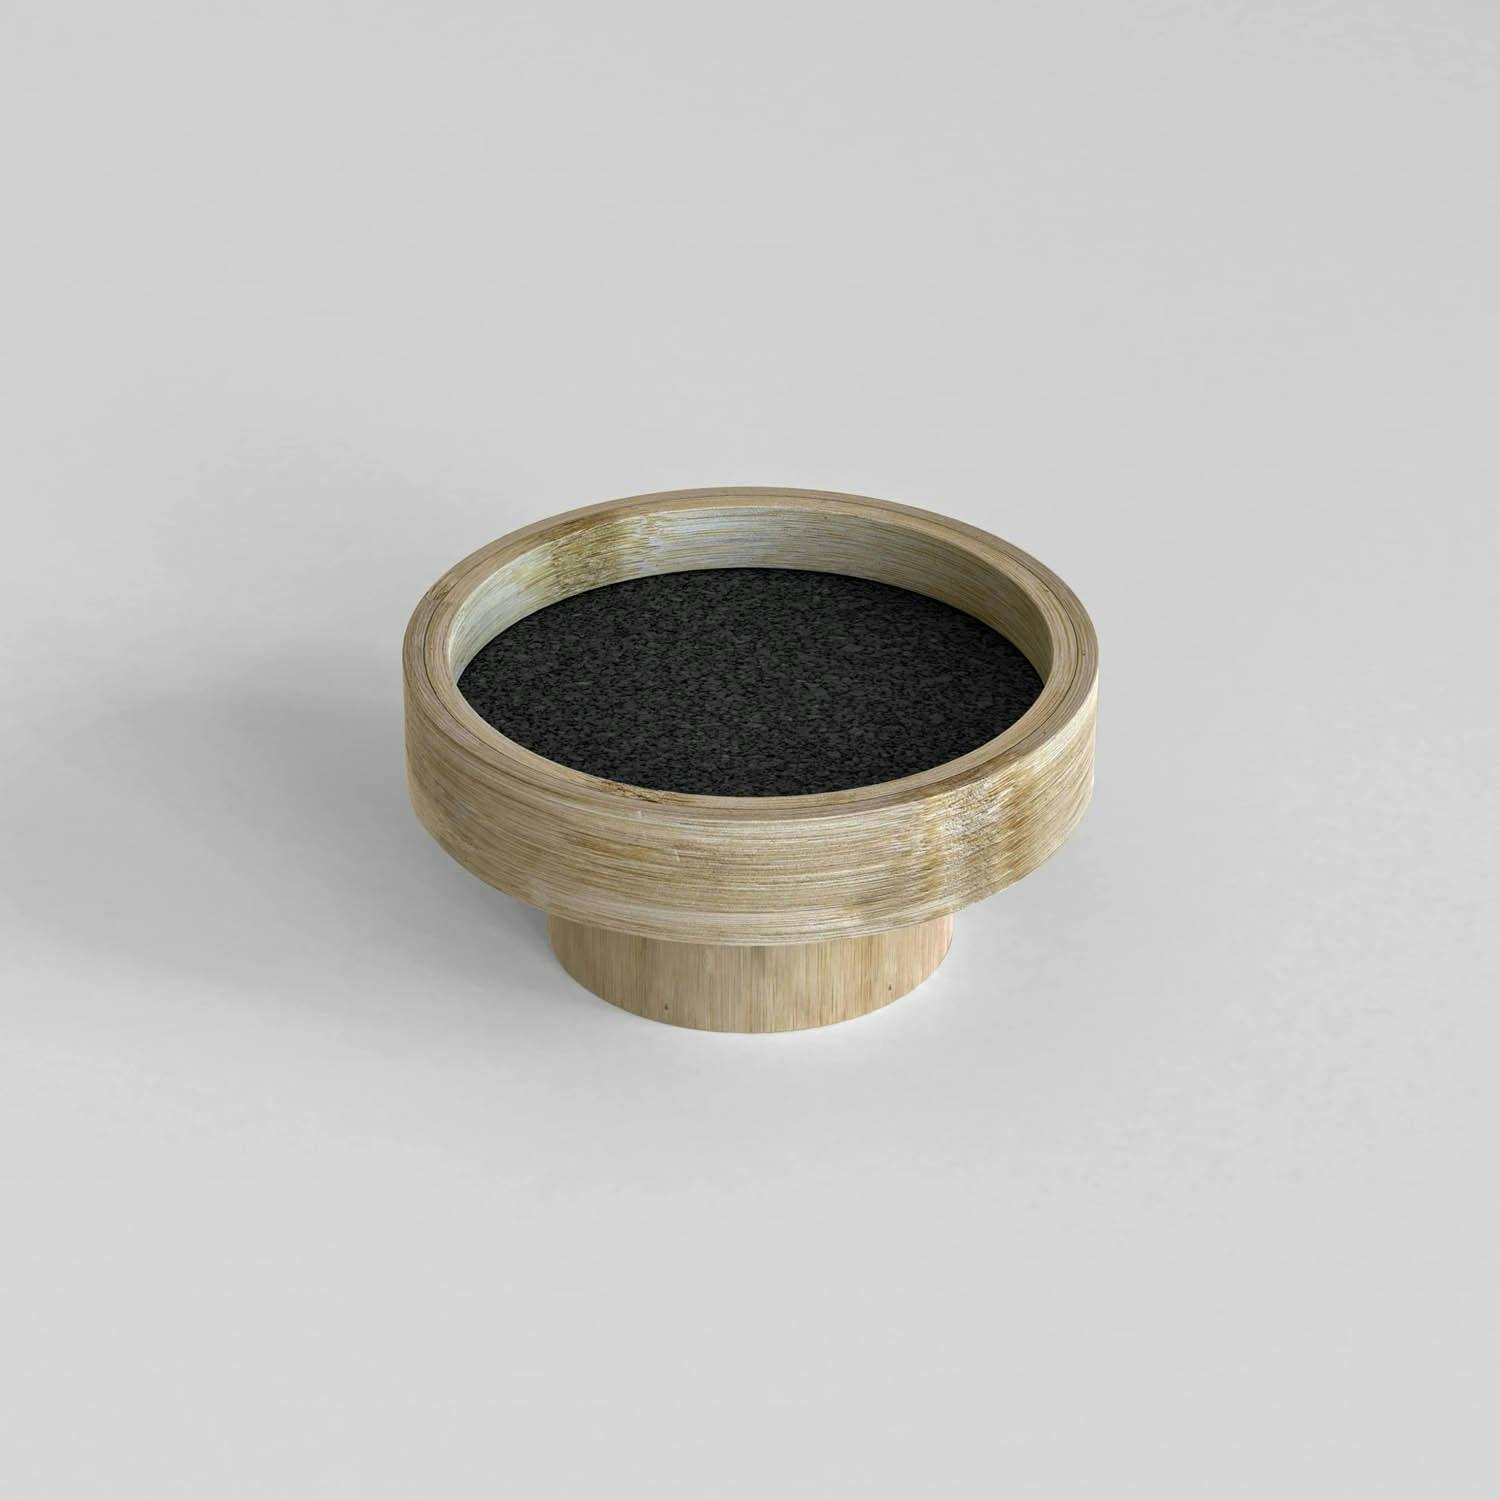 Round Podium Tray (S), a product by Hello December